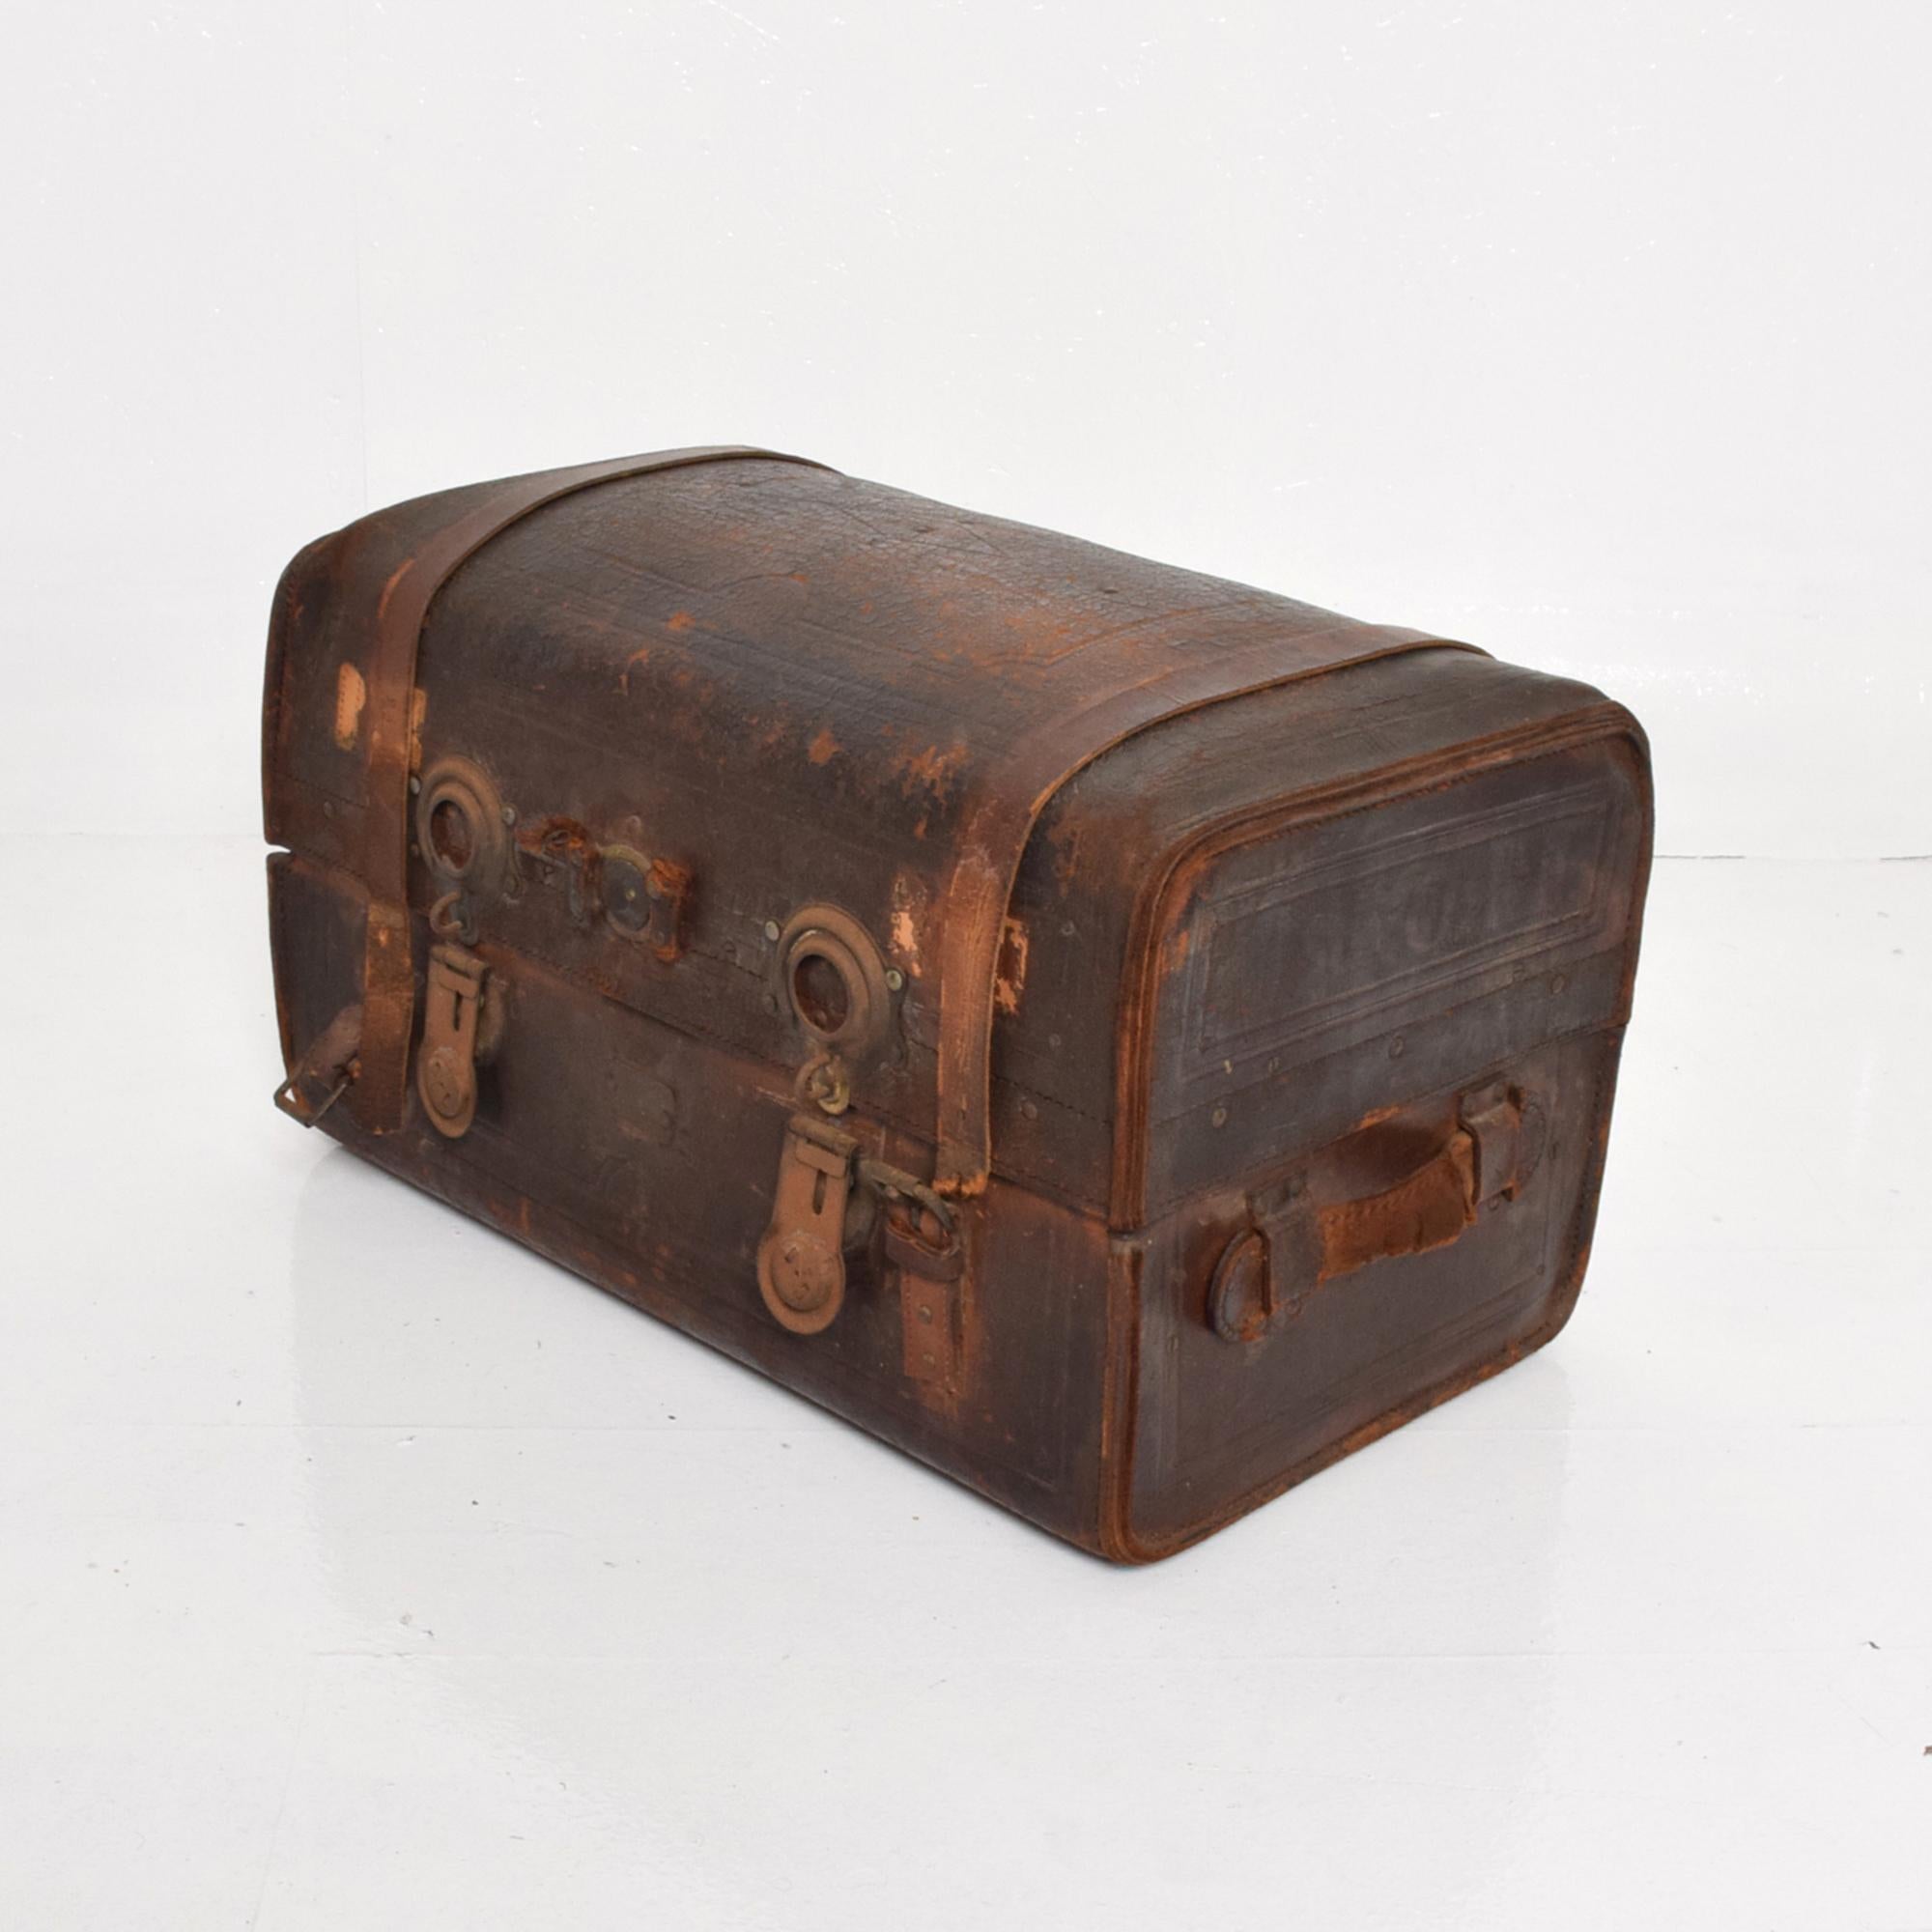 Patinated Antique Steamer Trunk Distressed Leather Travel by S. Dennin New York